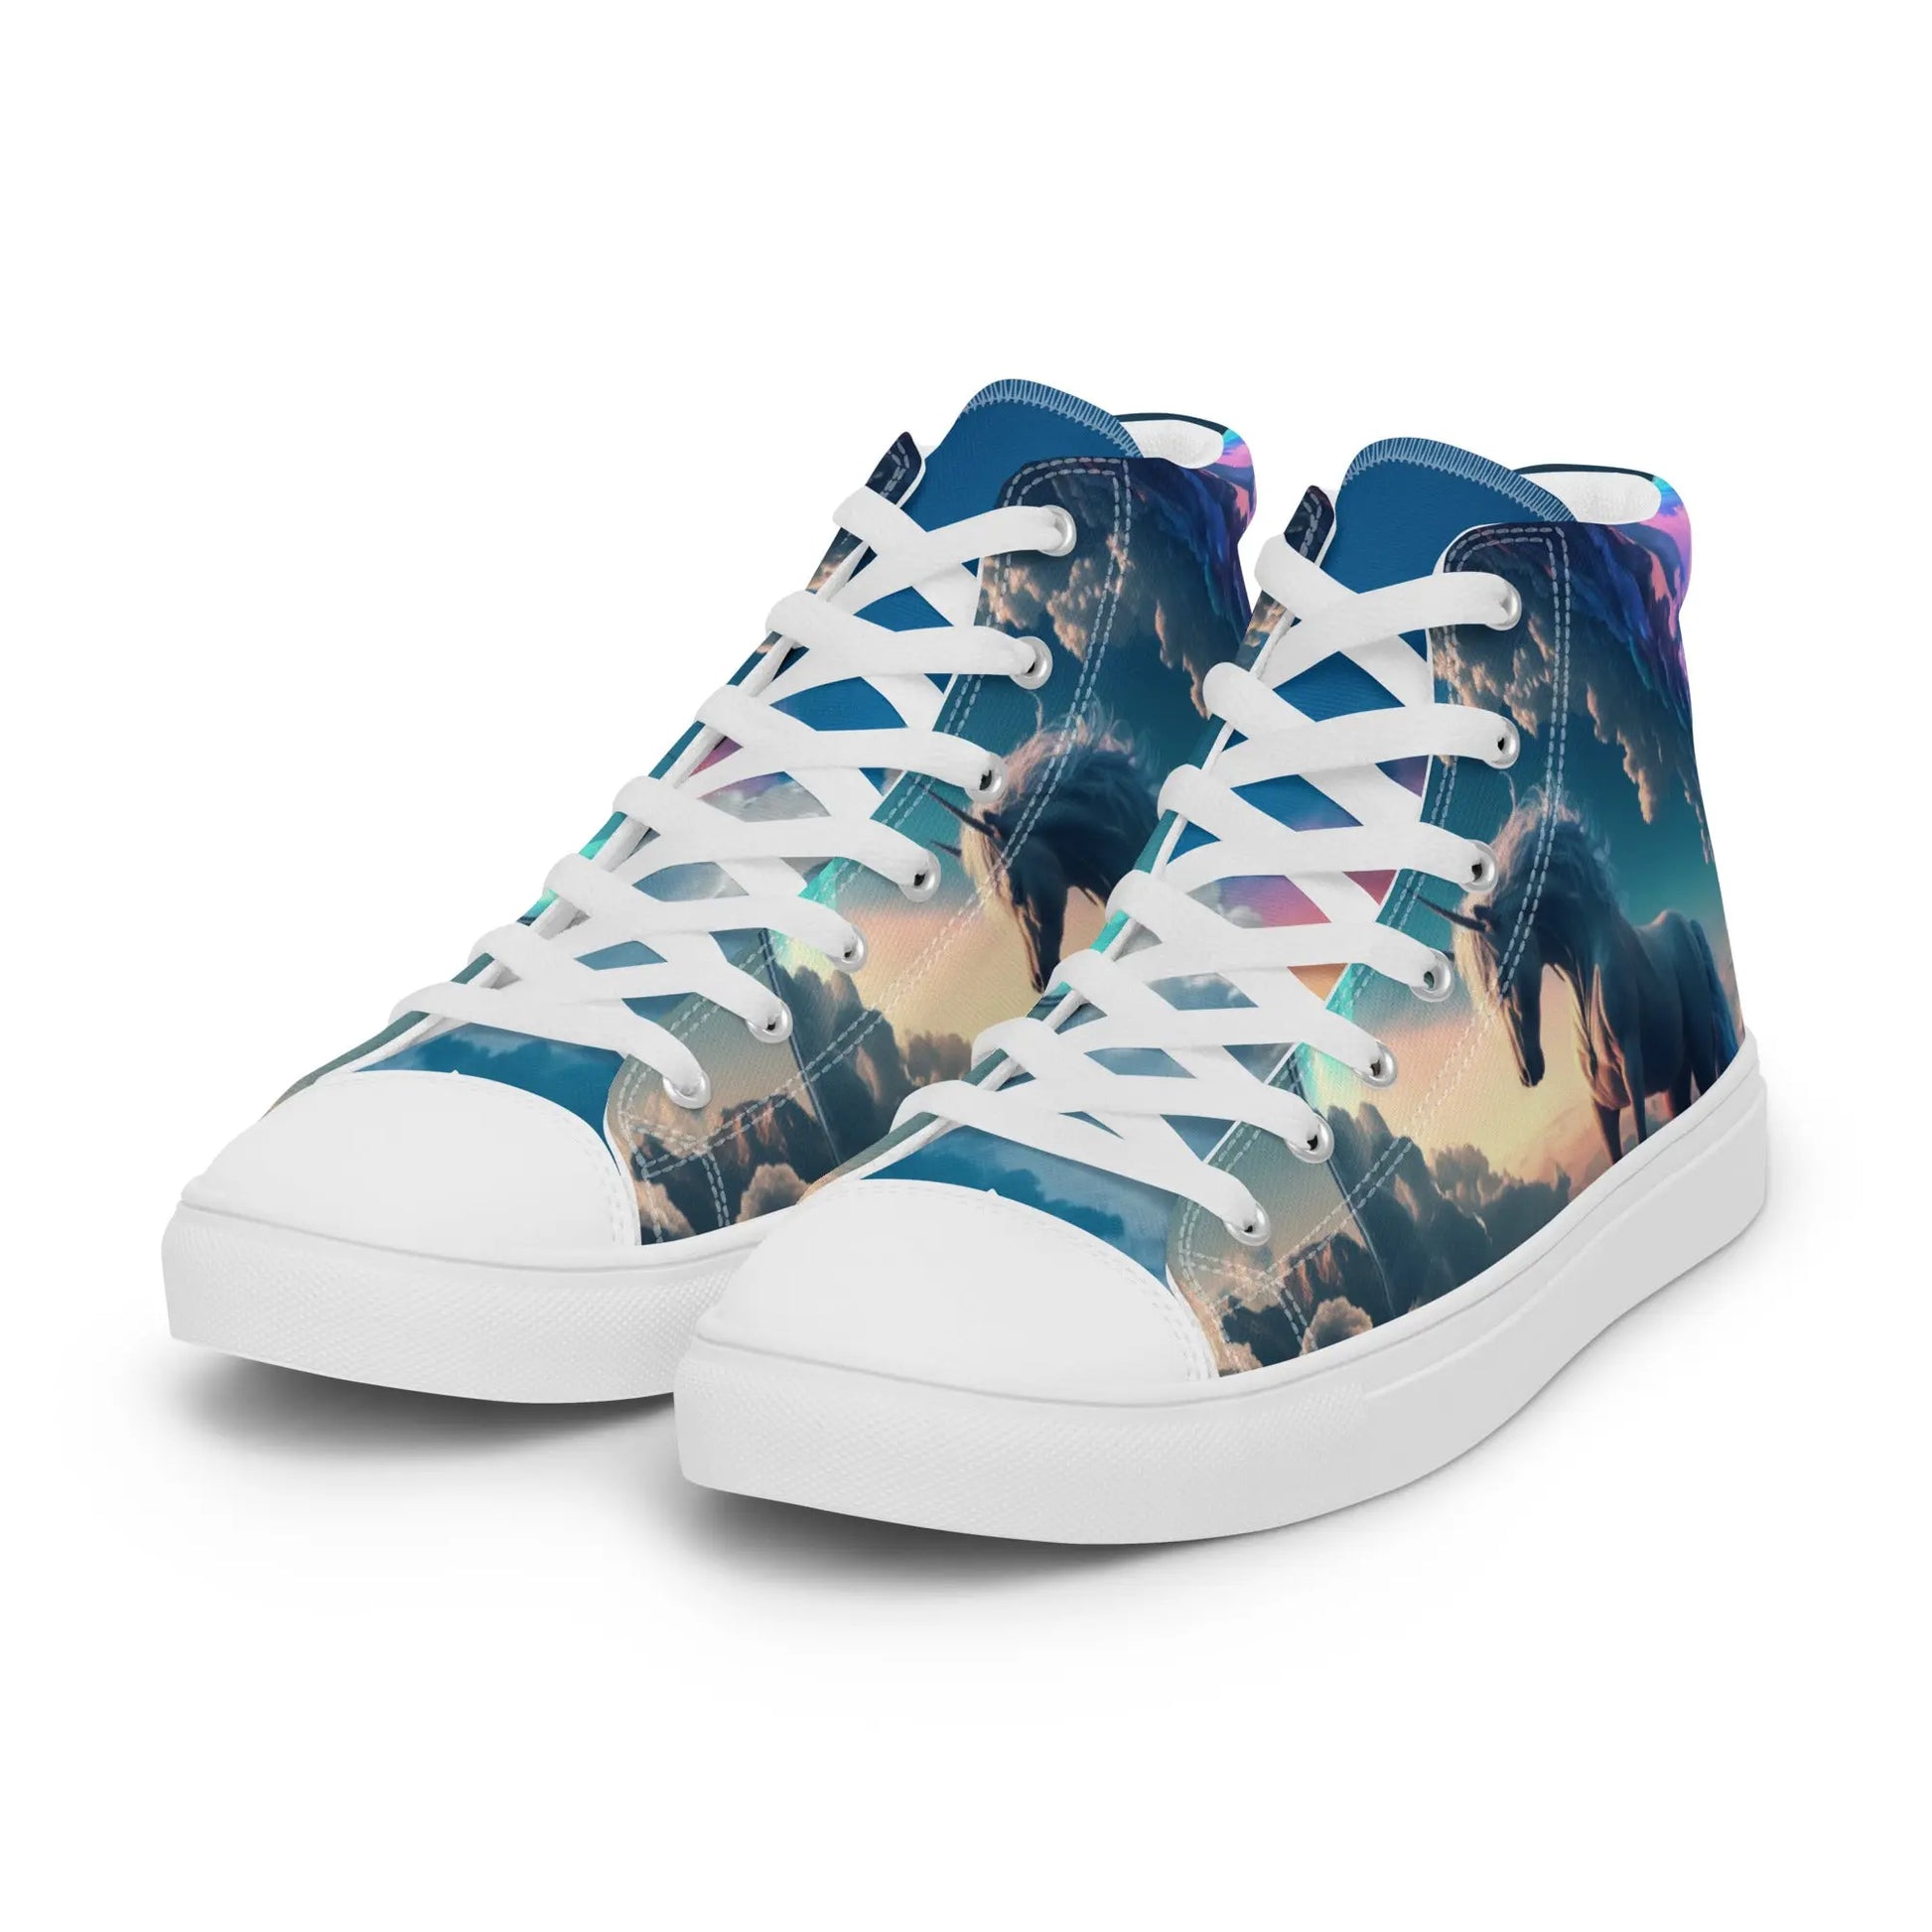 Unicorn On The Bubble High Top Sneakers: Magical Style, Animal Print, Unisex Footwear, Durable, Comfortable, Bubble Design, Walking on Clouds Kinetic Footwear